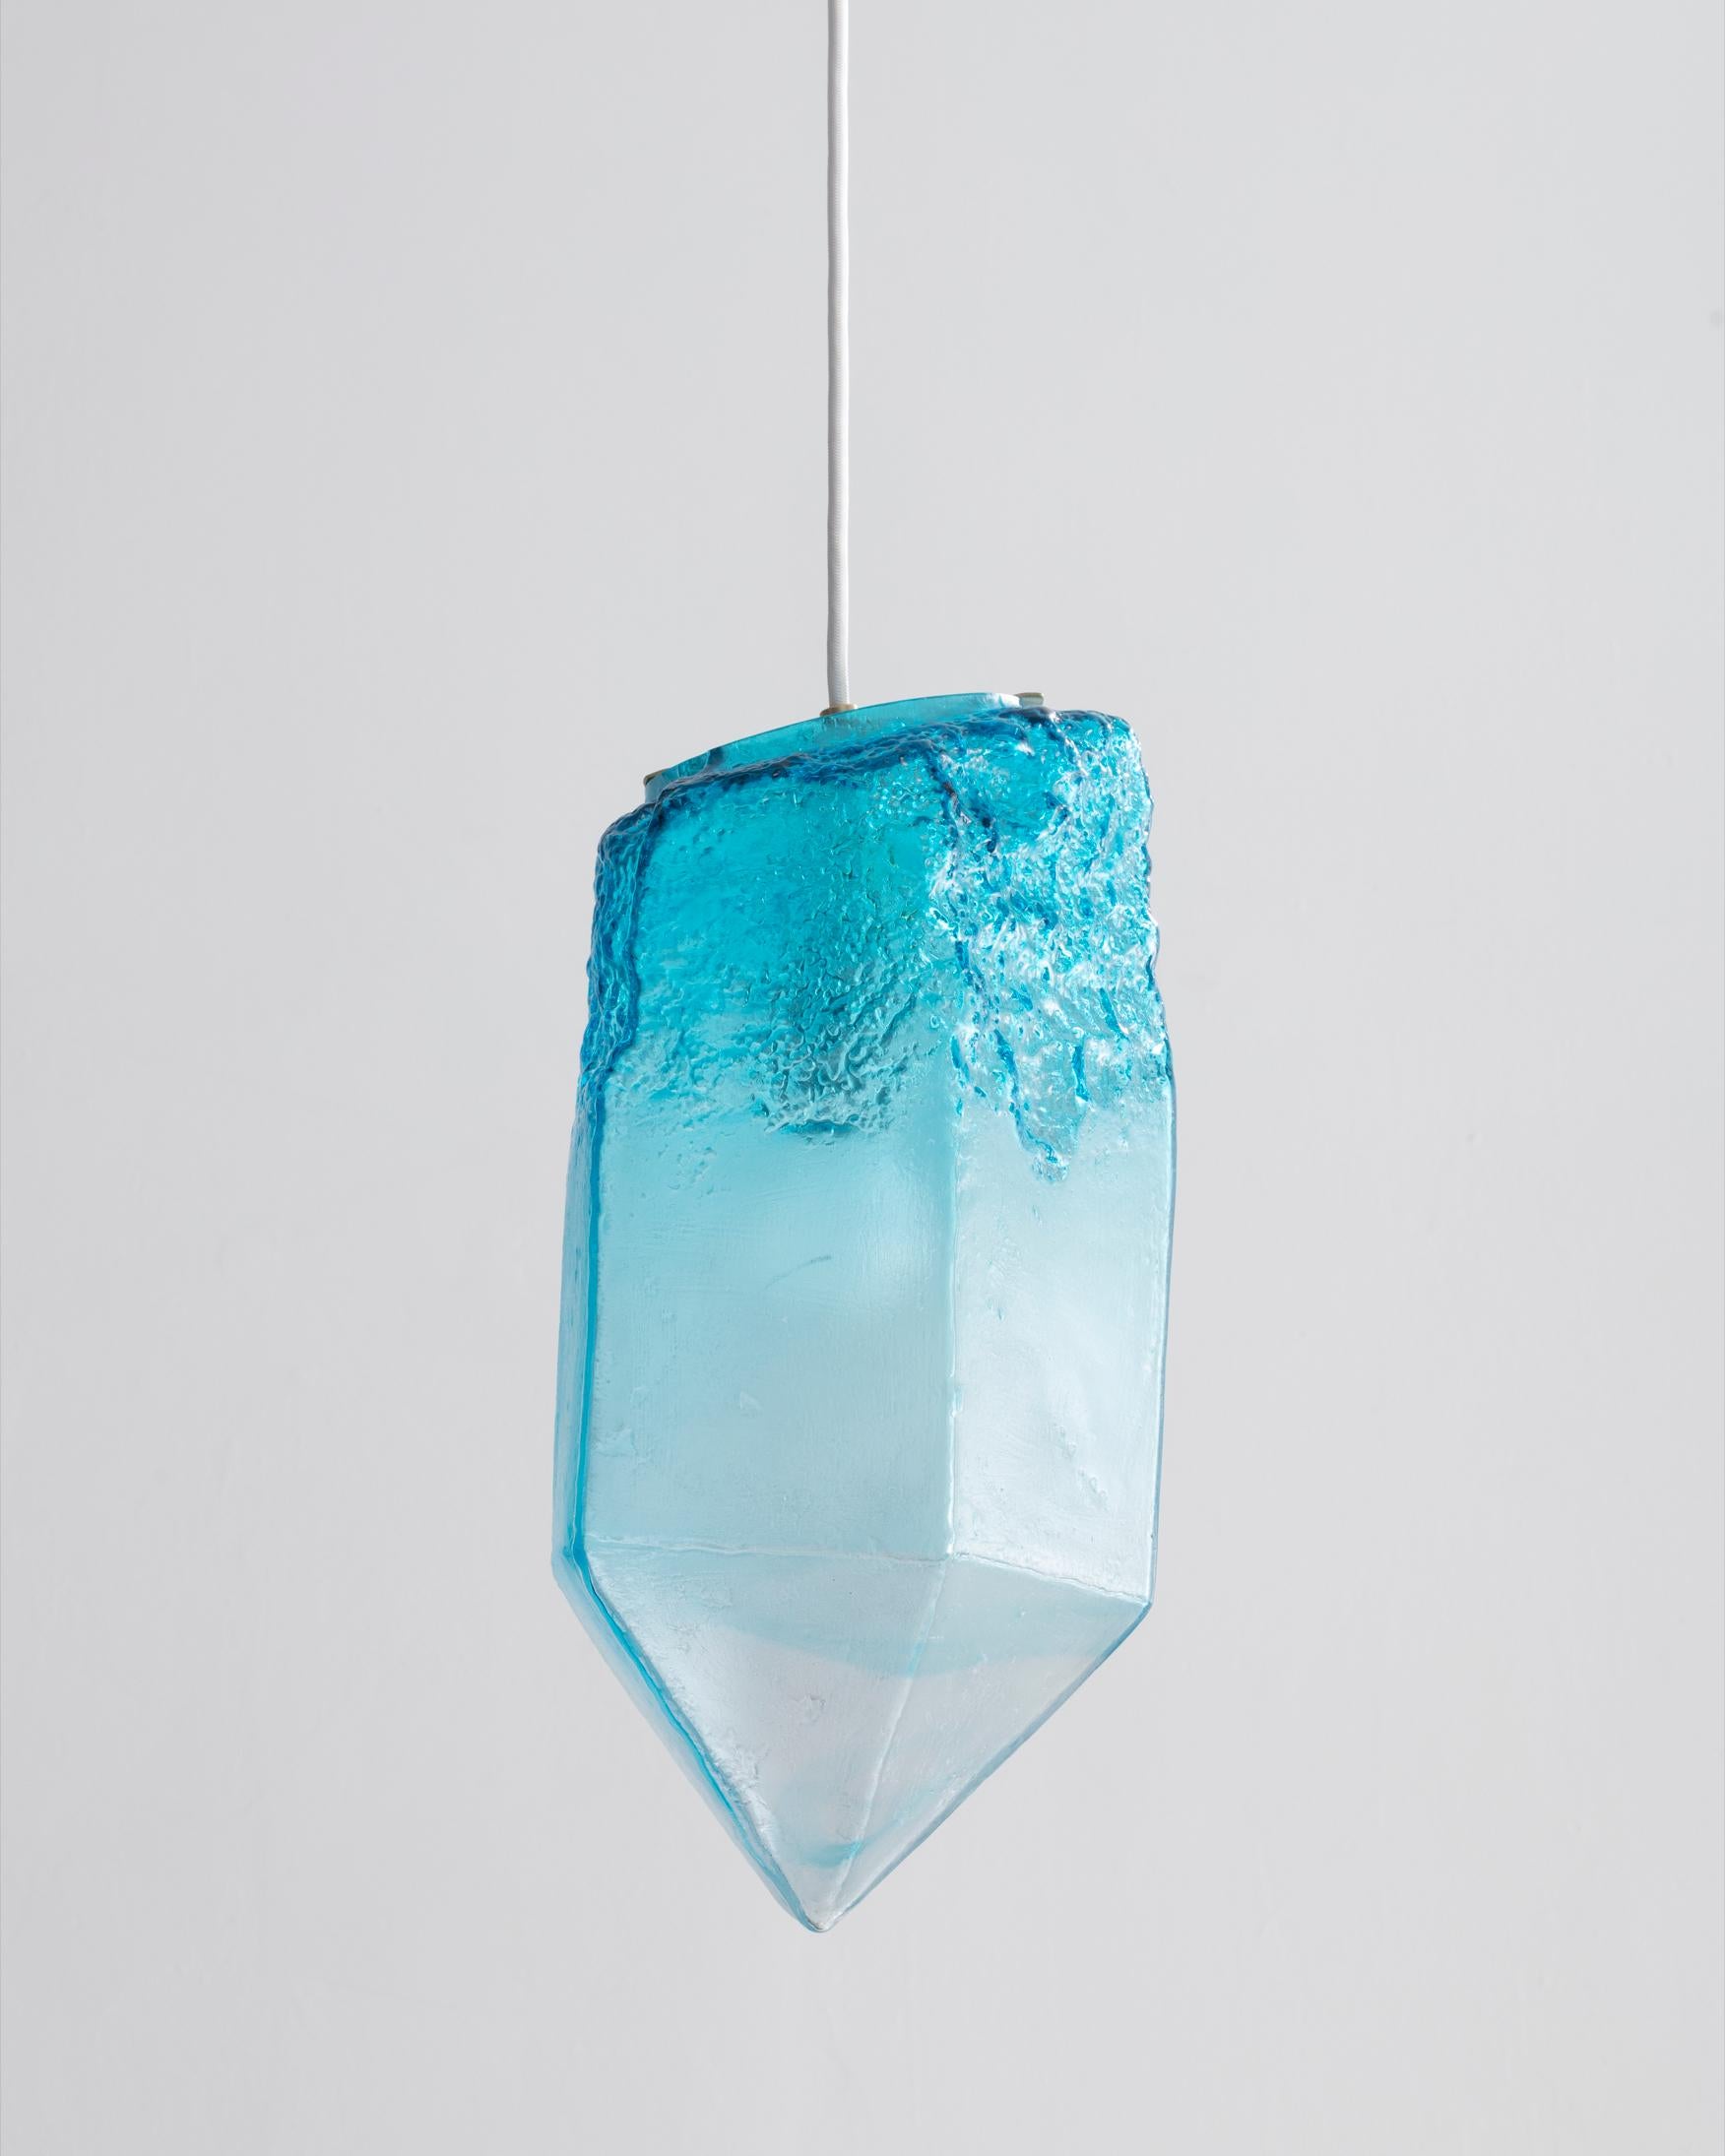 Crystal illuminated sculptural pendant in hand blown turquoise glass. Designed and made by Jeff Zimmerman, USA, 2016.
 